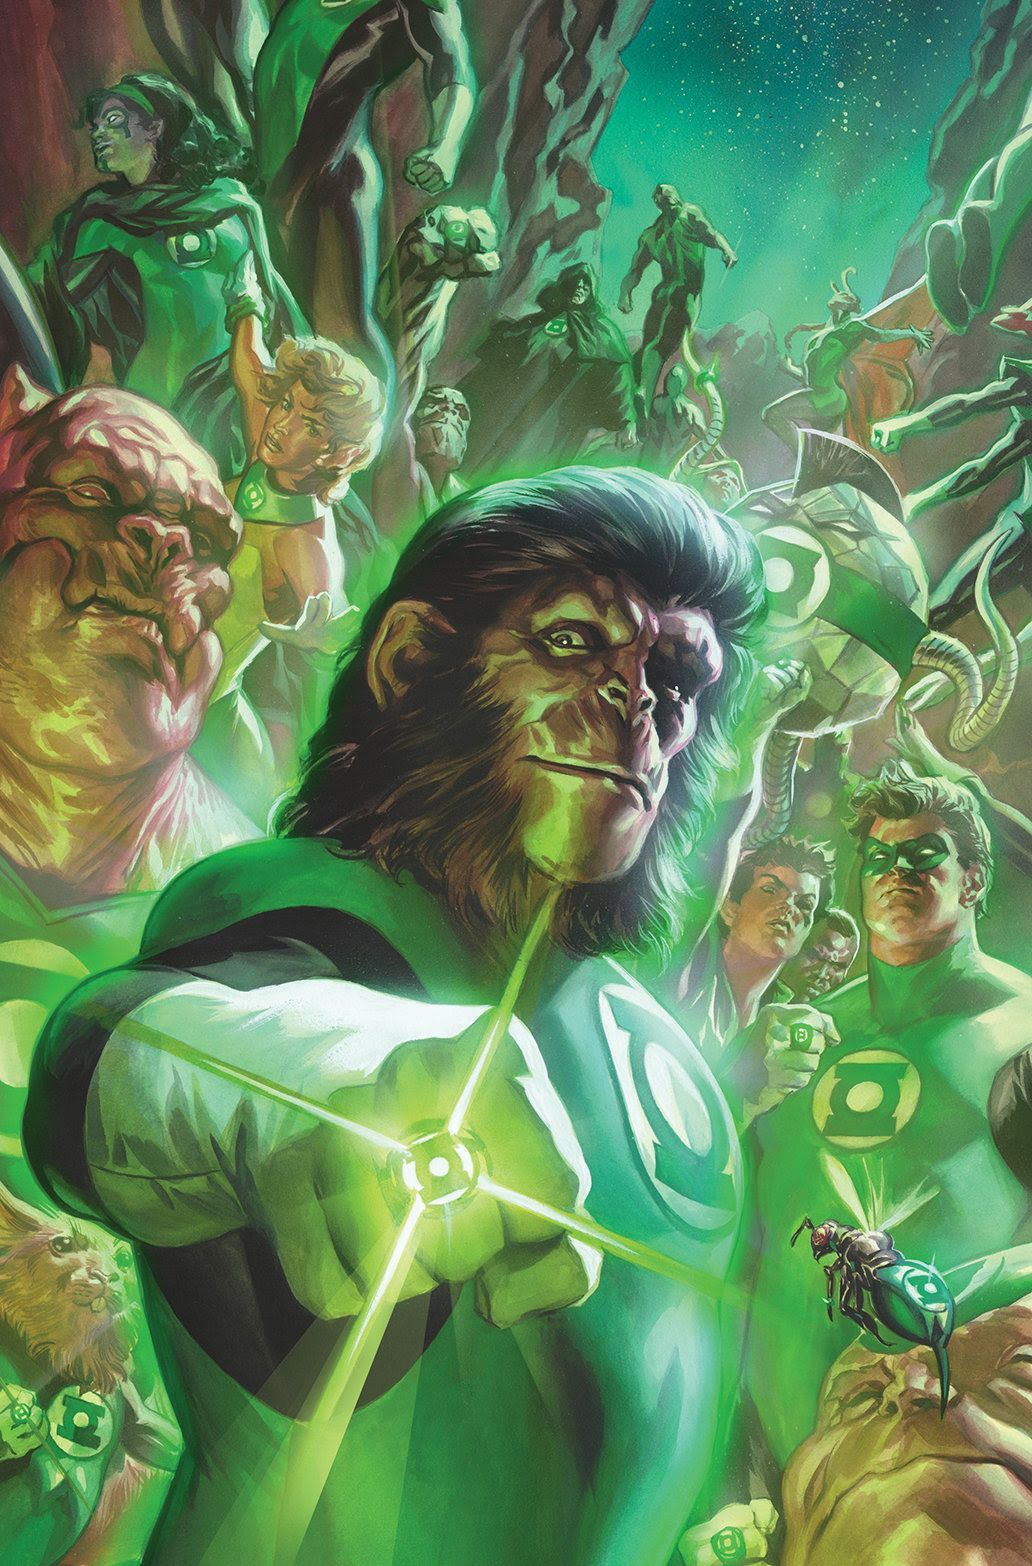 Planet Of The Apes / Green Lantern & DC Comics Rebirth Spoilers: 11 Power Rings In DC Comics Via Boom Cross Over Collaboration On New Power Ring!